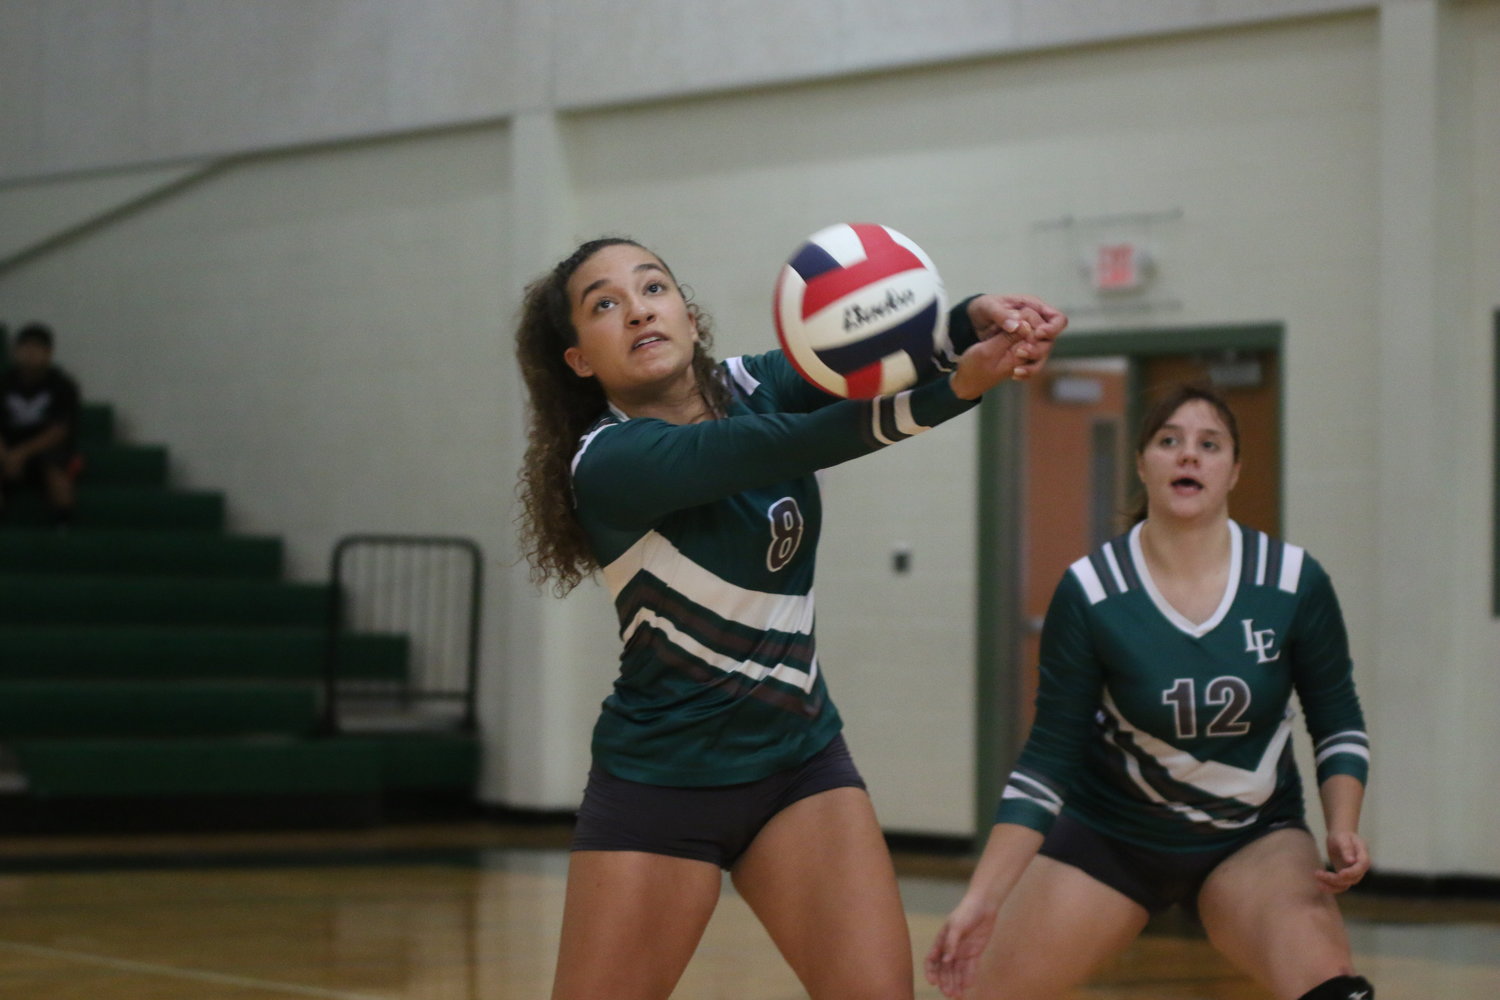 The Luling Lady Eagles struggled Tuesday due to a slow start, but eventually got things going in the second and third set of their three-set loss to Schertz John Paul II.